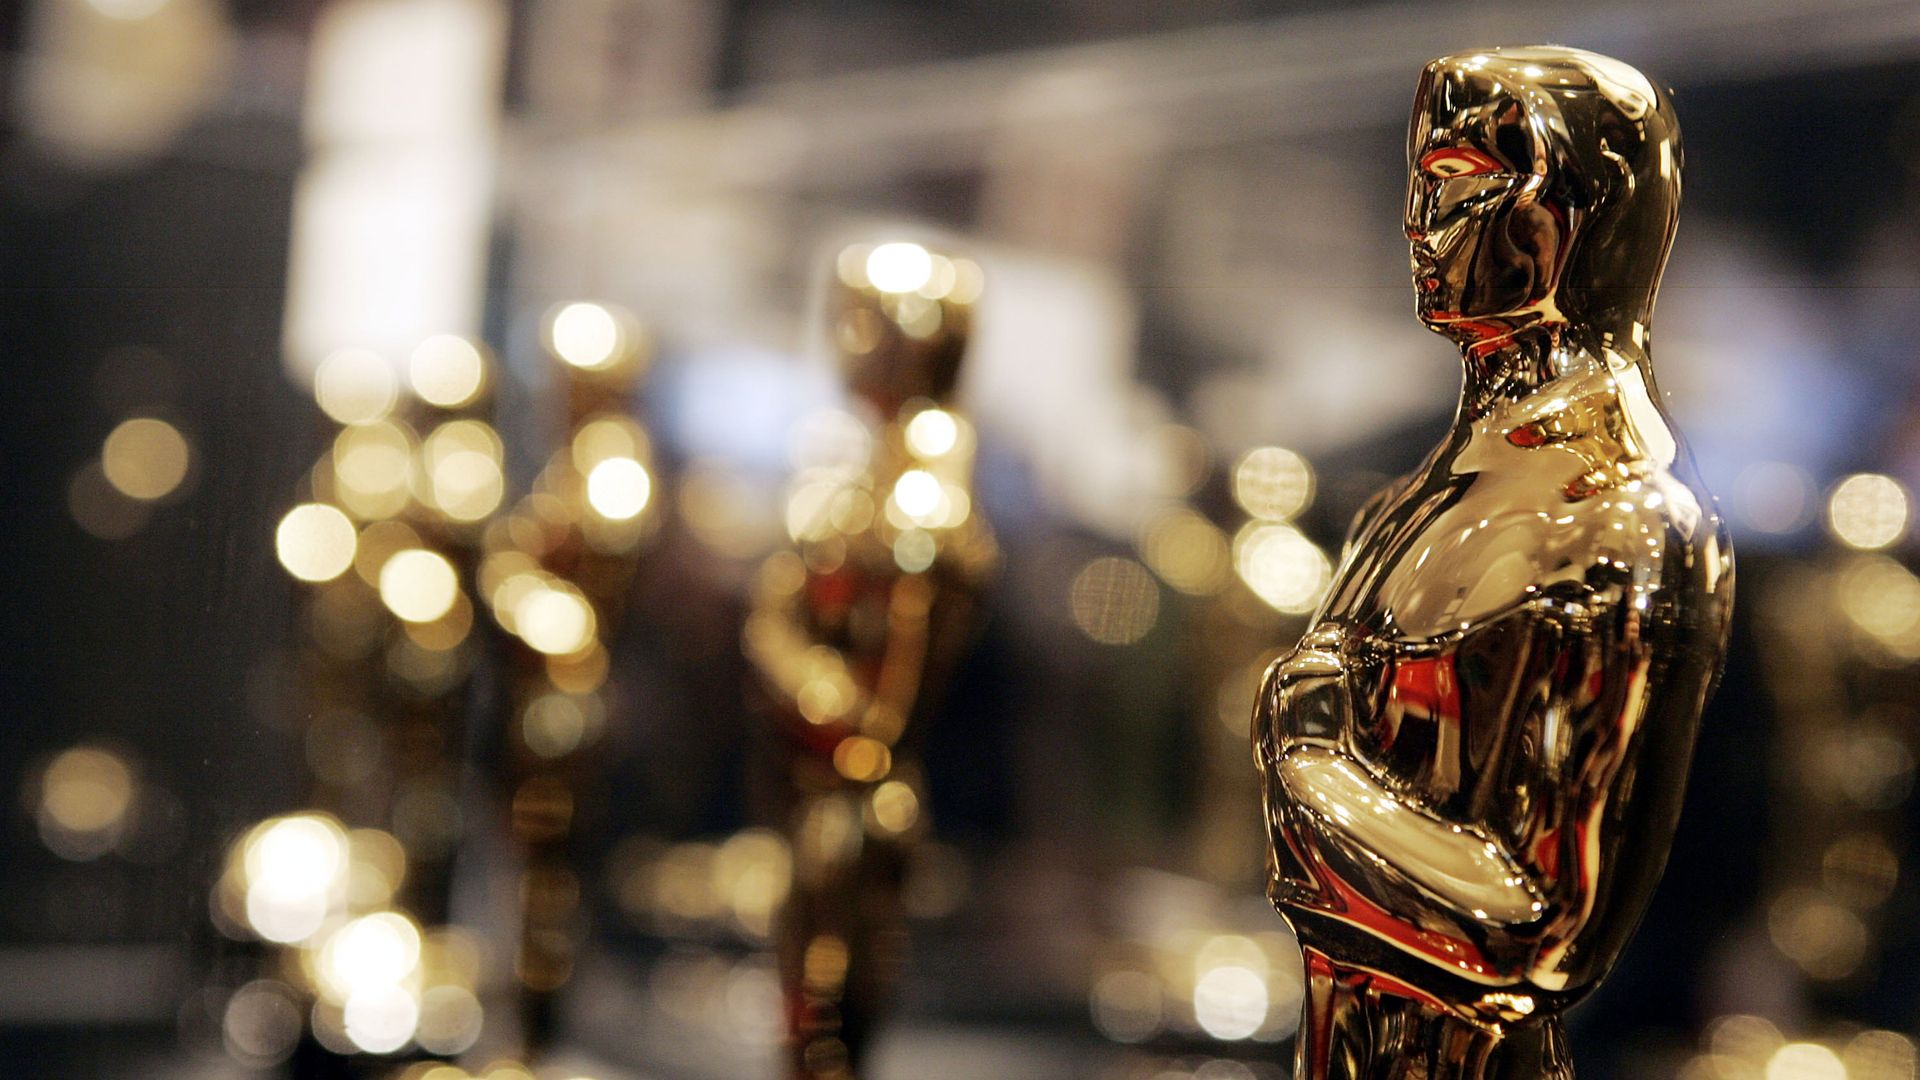 Oscars are displayed at "Meet the Oscars", an exhibit featuring the 50 Oscar statuettes that will be presented at the 78th Academy Awards, at Hollywood and Highland on February 10, 2006 in Los Angeles, California. Photo by Kevin Winter/Getty Images)